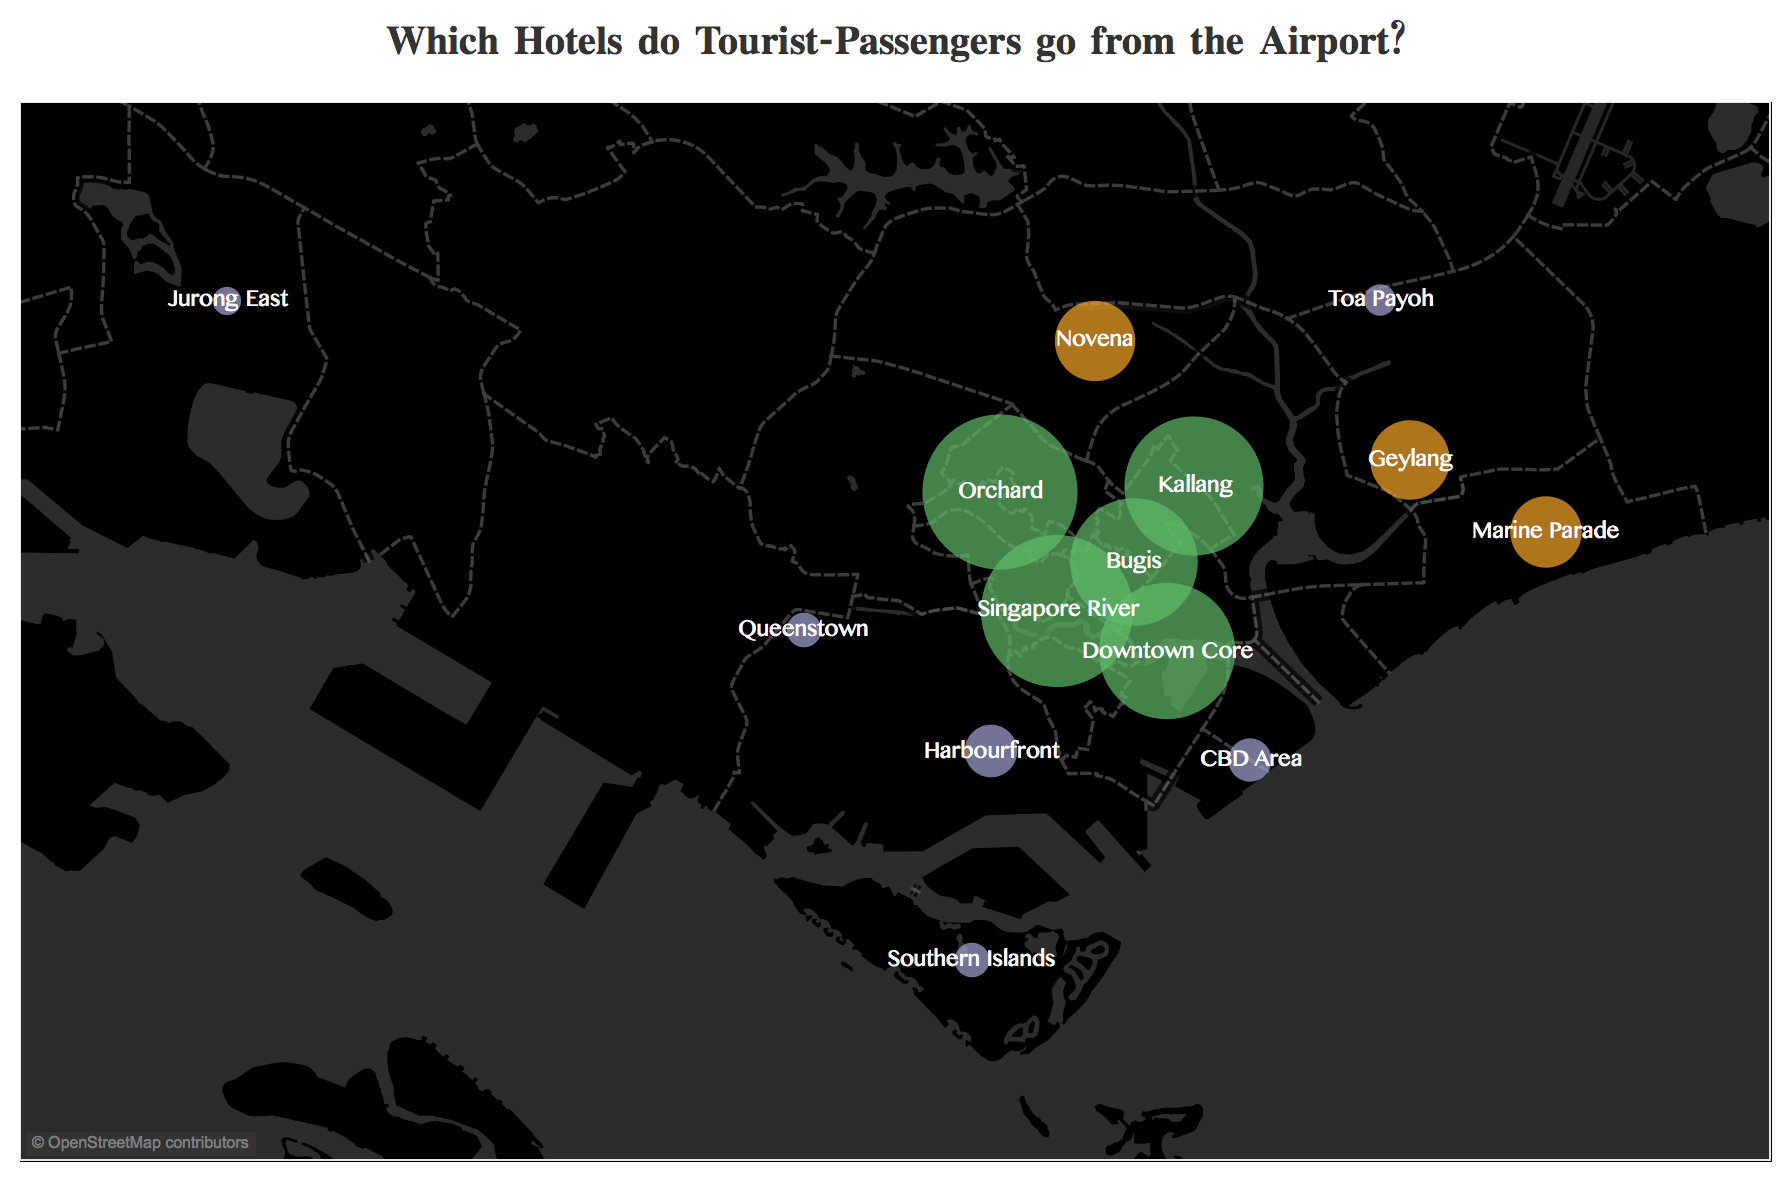 Which Hotels do Tourist-Passengers go from the Airport?